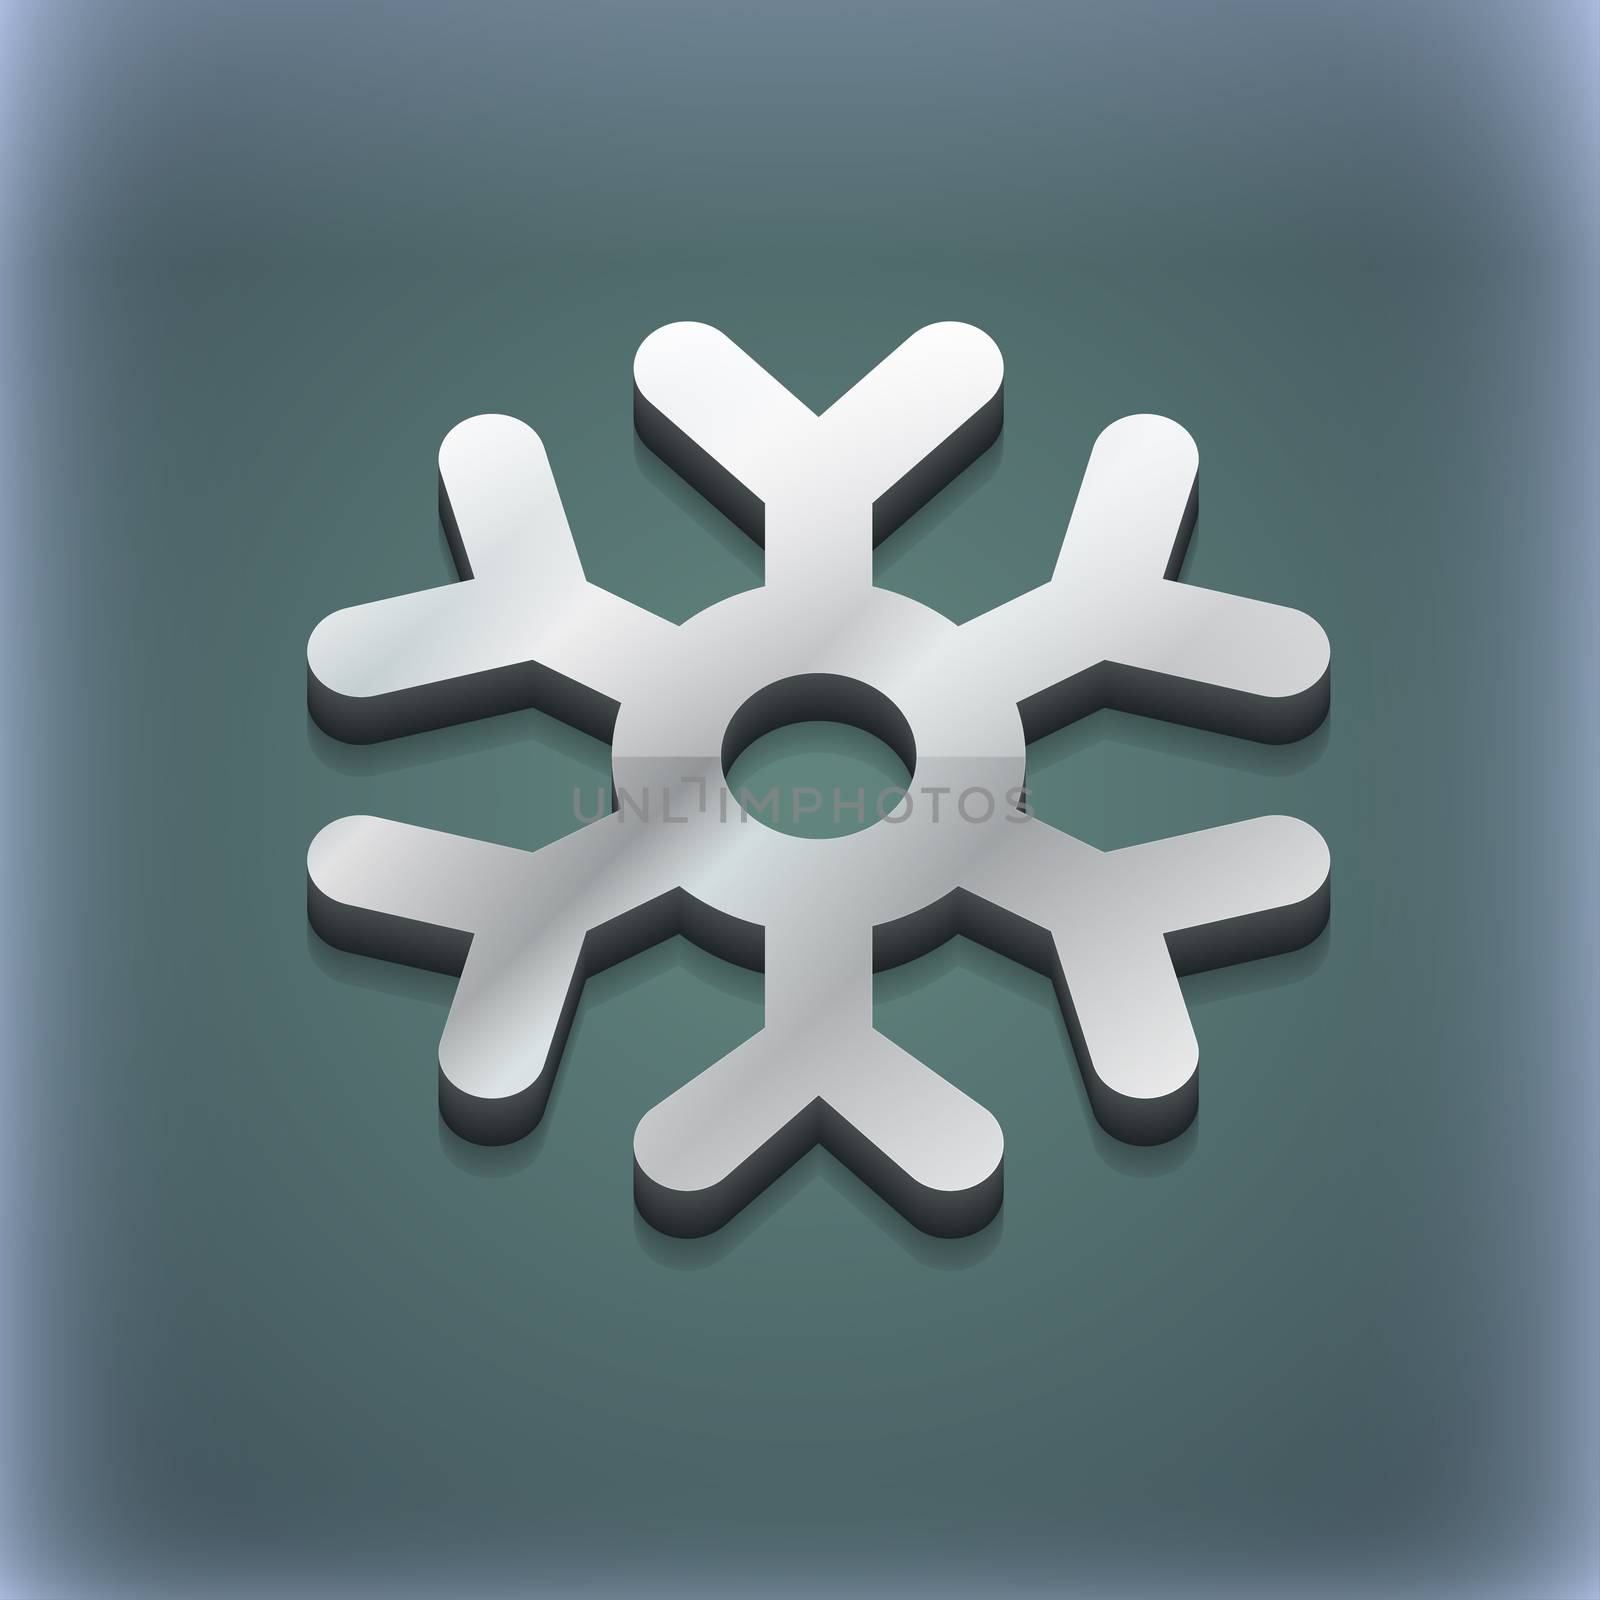 snowflake icon symbol. 3D style. Trendy, modern design with space for your text illustration. Raster version